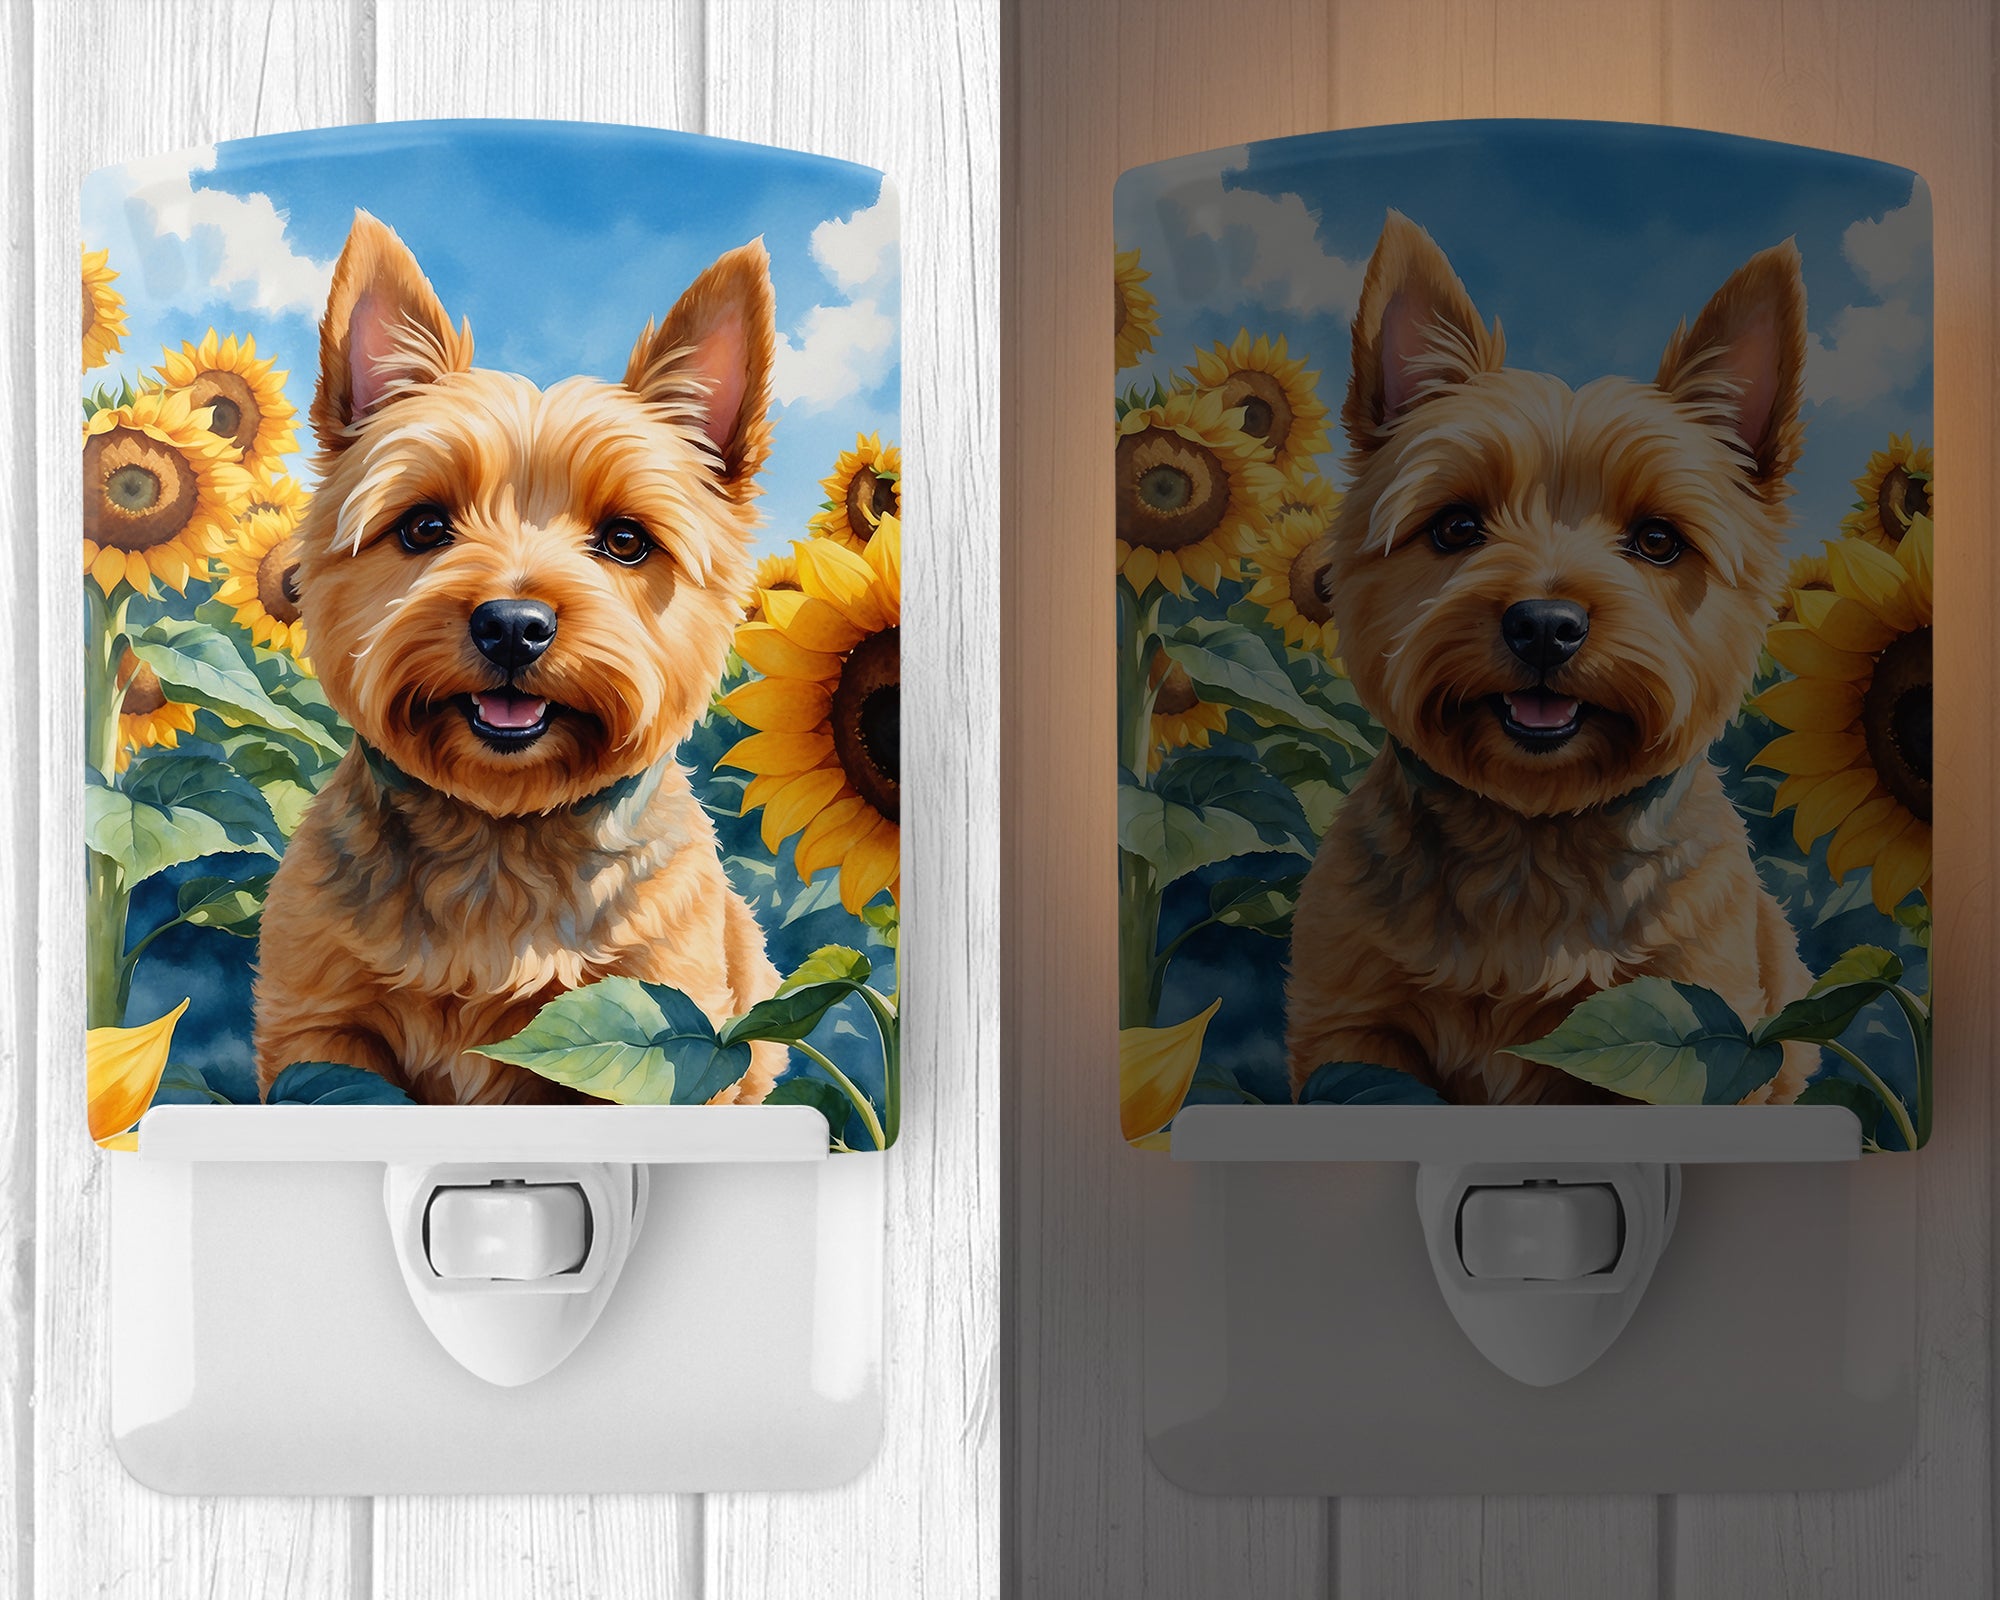 Buy this Norwich Terrier in Sunflowers Ceramic Night Light